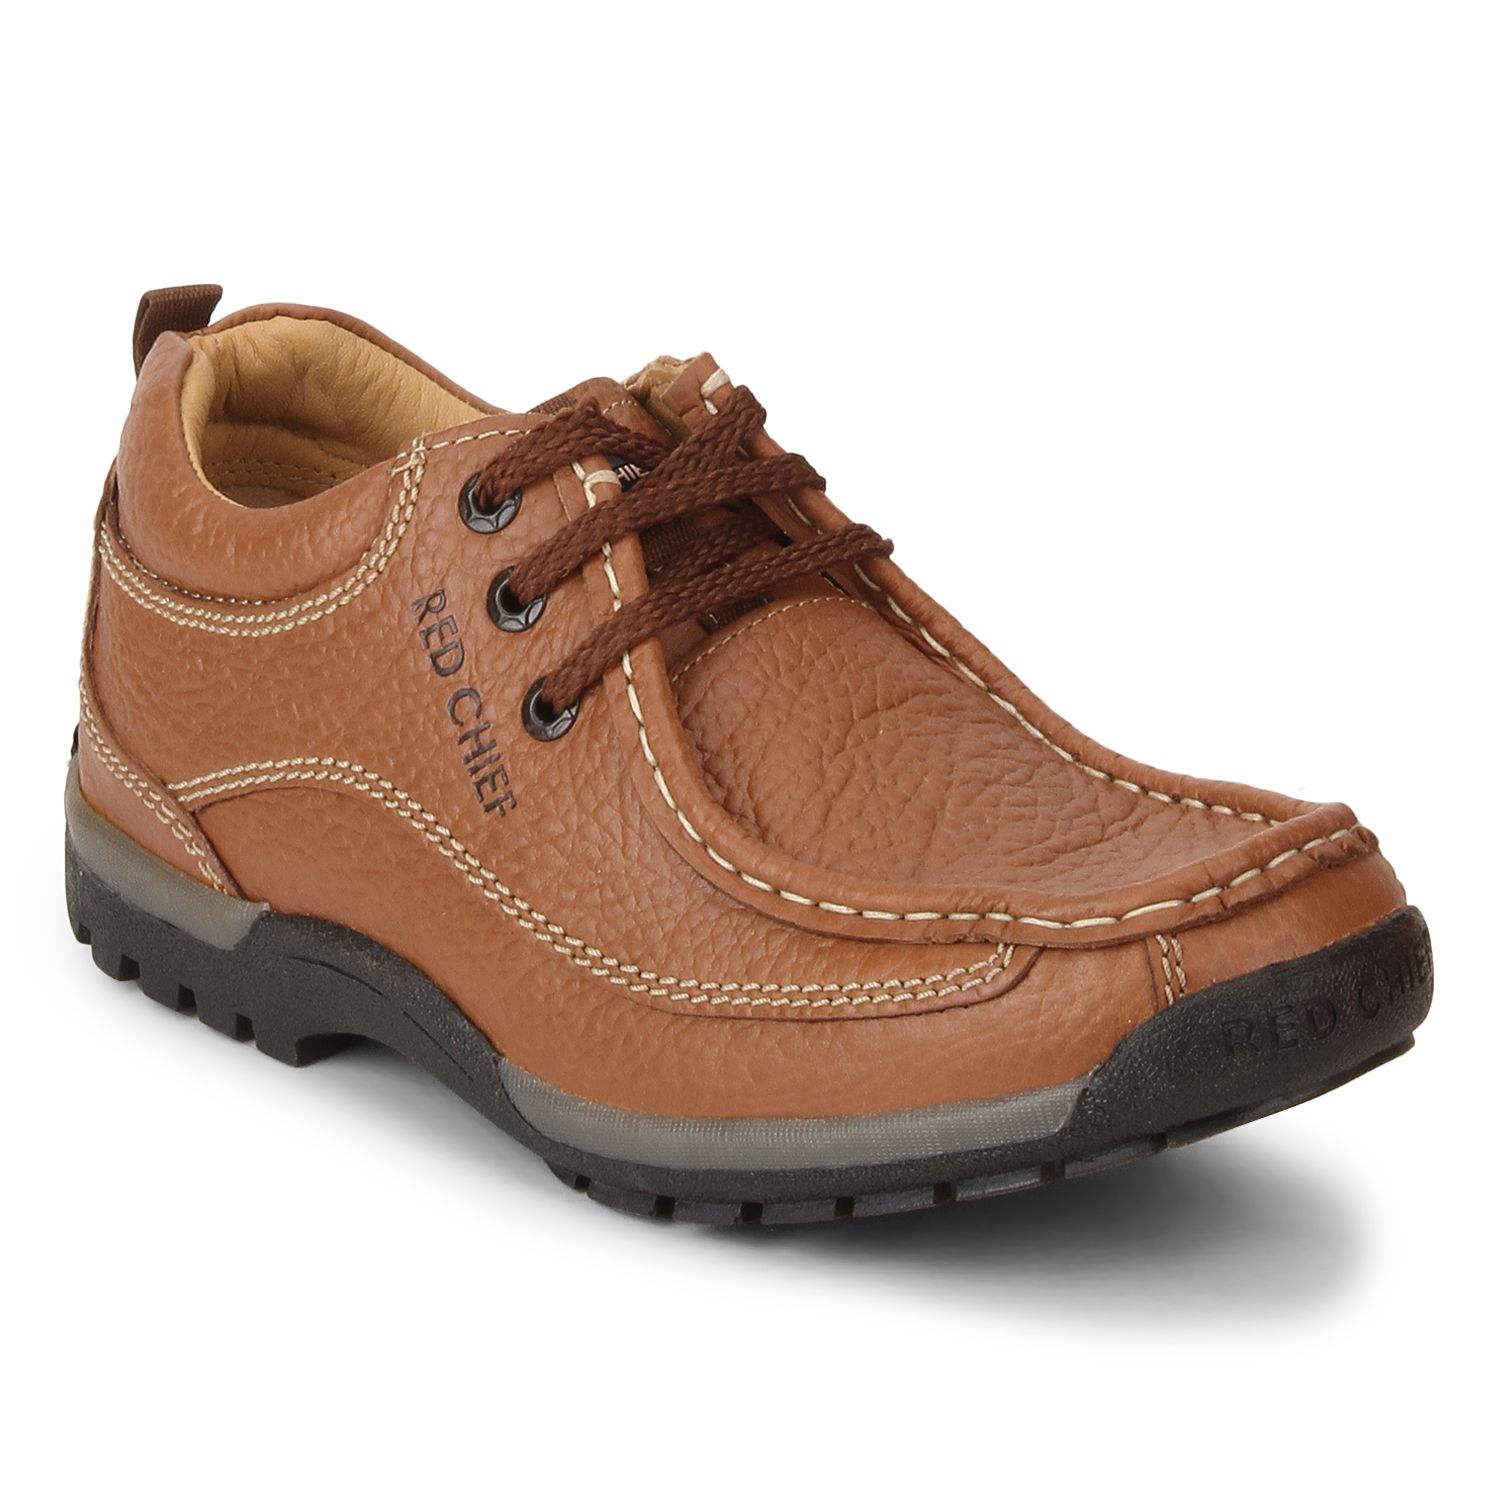 Red Chief Outdoor Tan Casual Shoes - Buy Red Chief Outdoor Tan Casual Shoes Online at Best ...